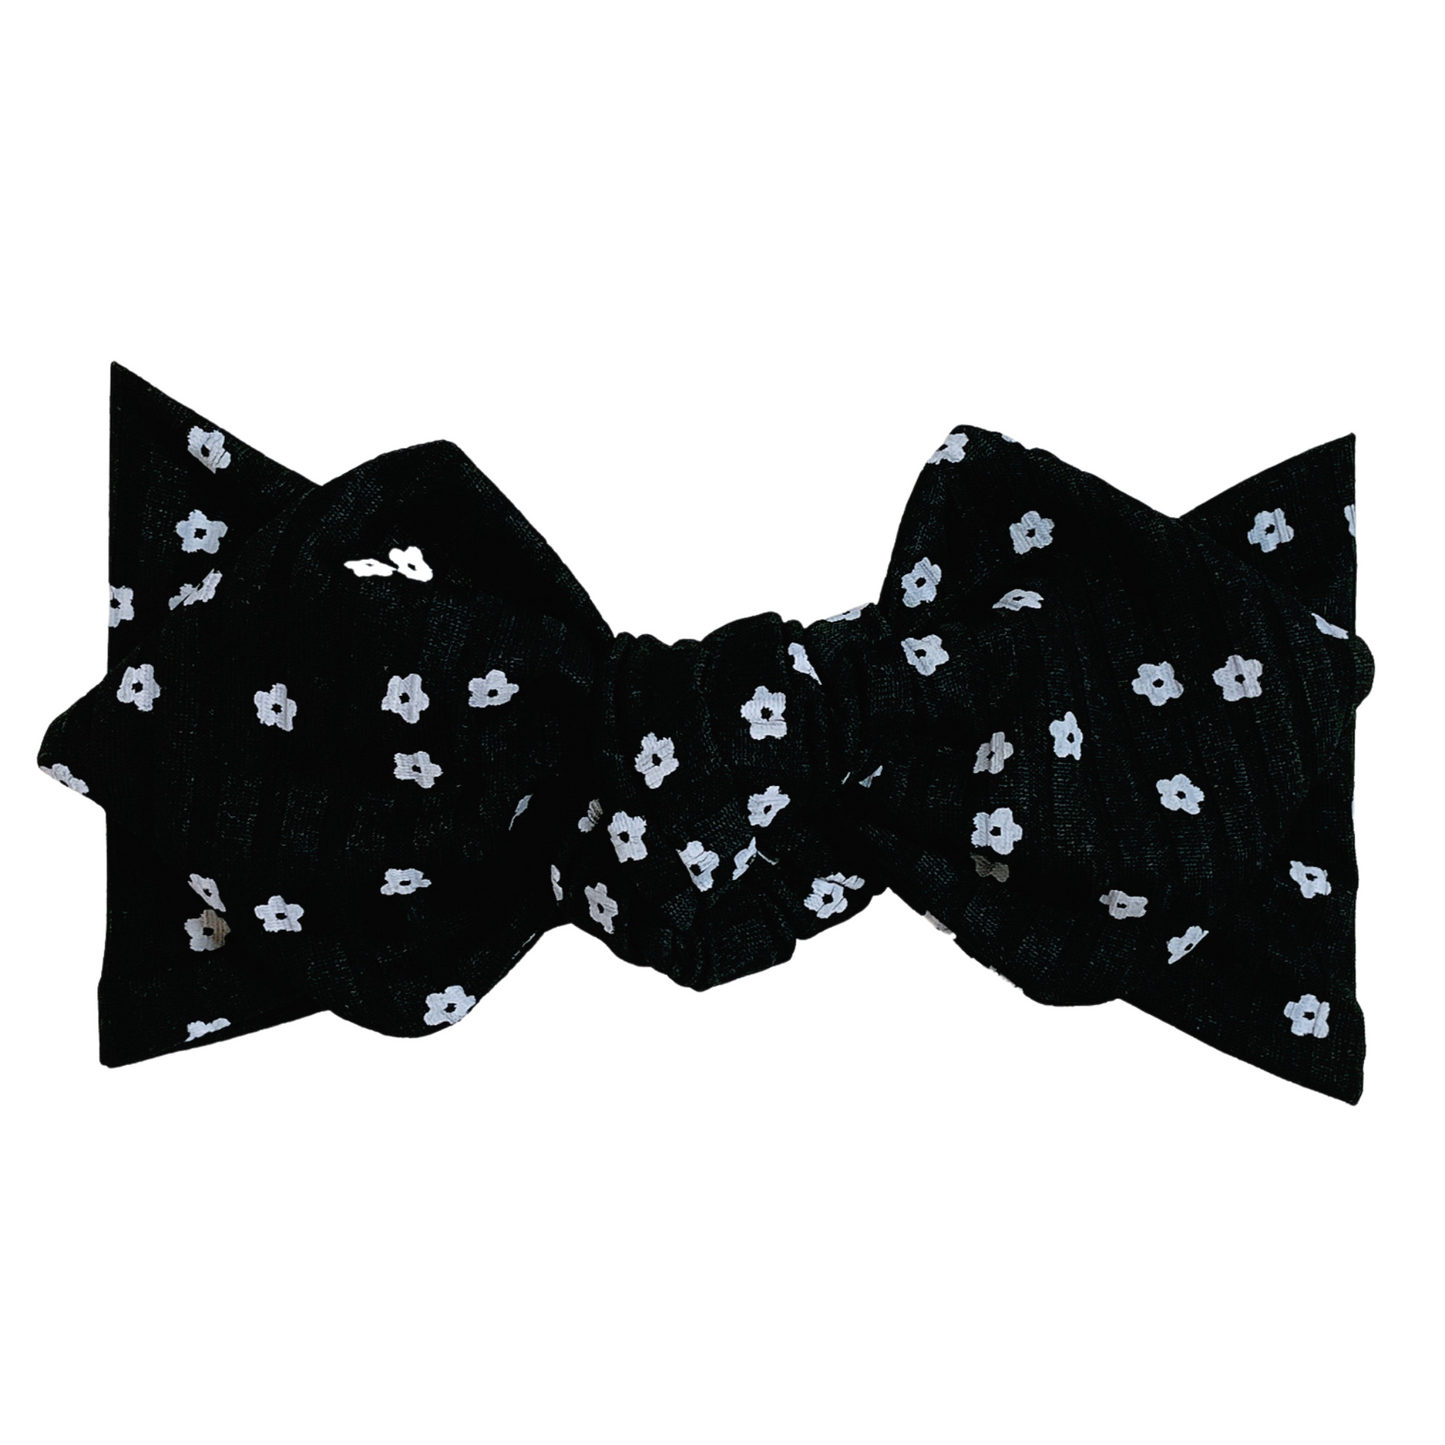 Top Knot Headband, Ribbed Black/White Floral